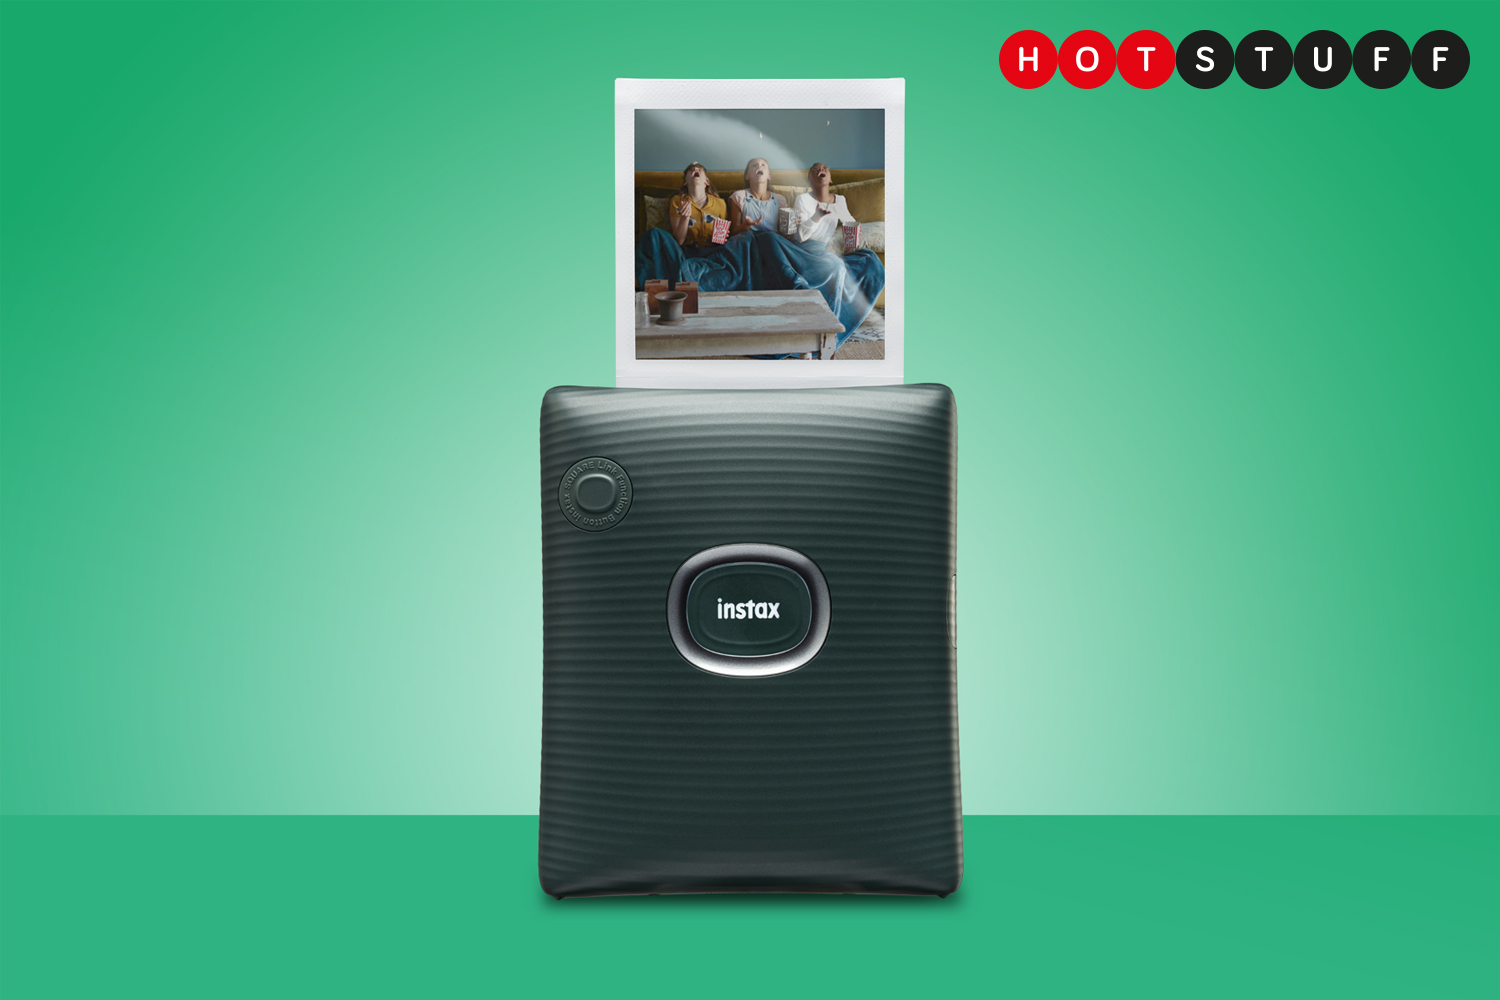 Square is hip for Fuji's latest Instax printer